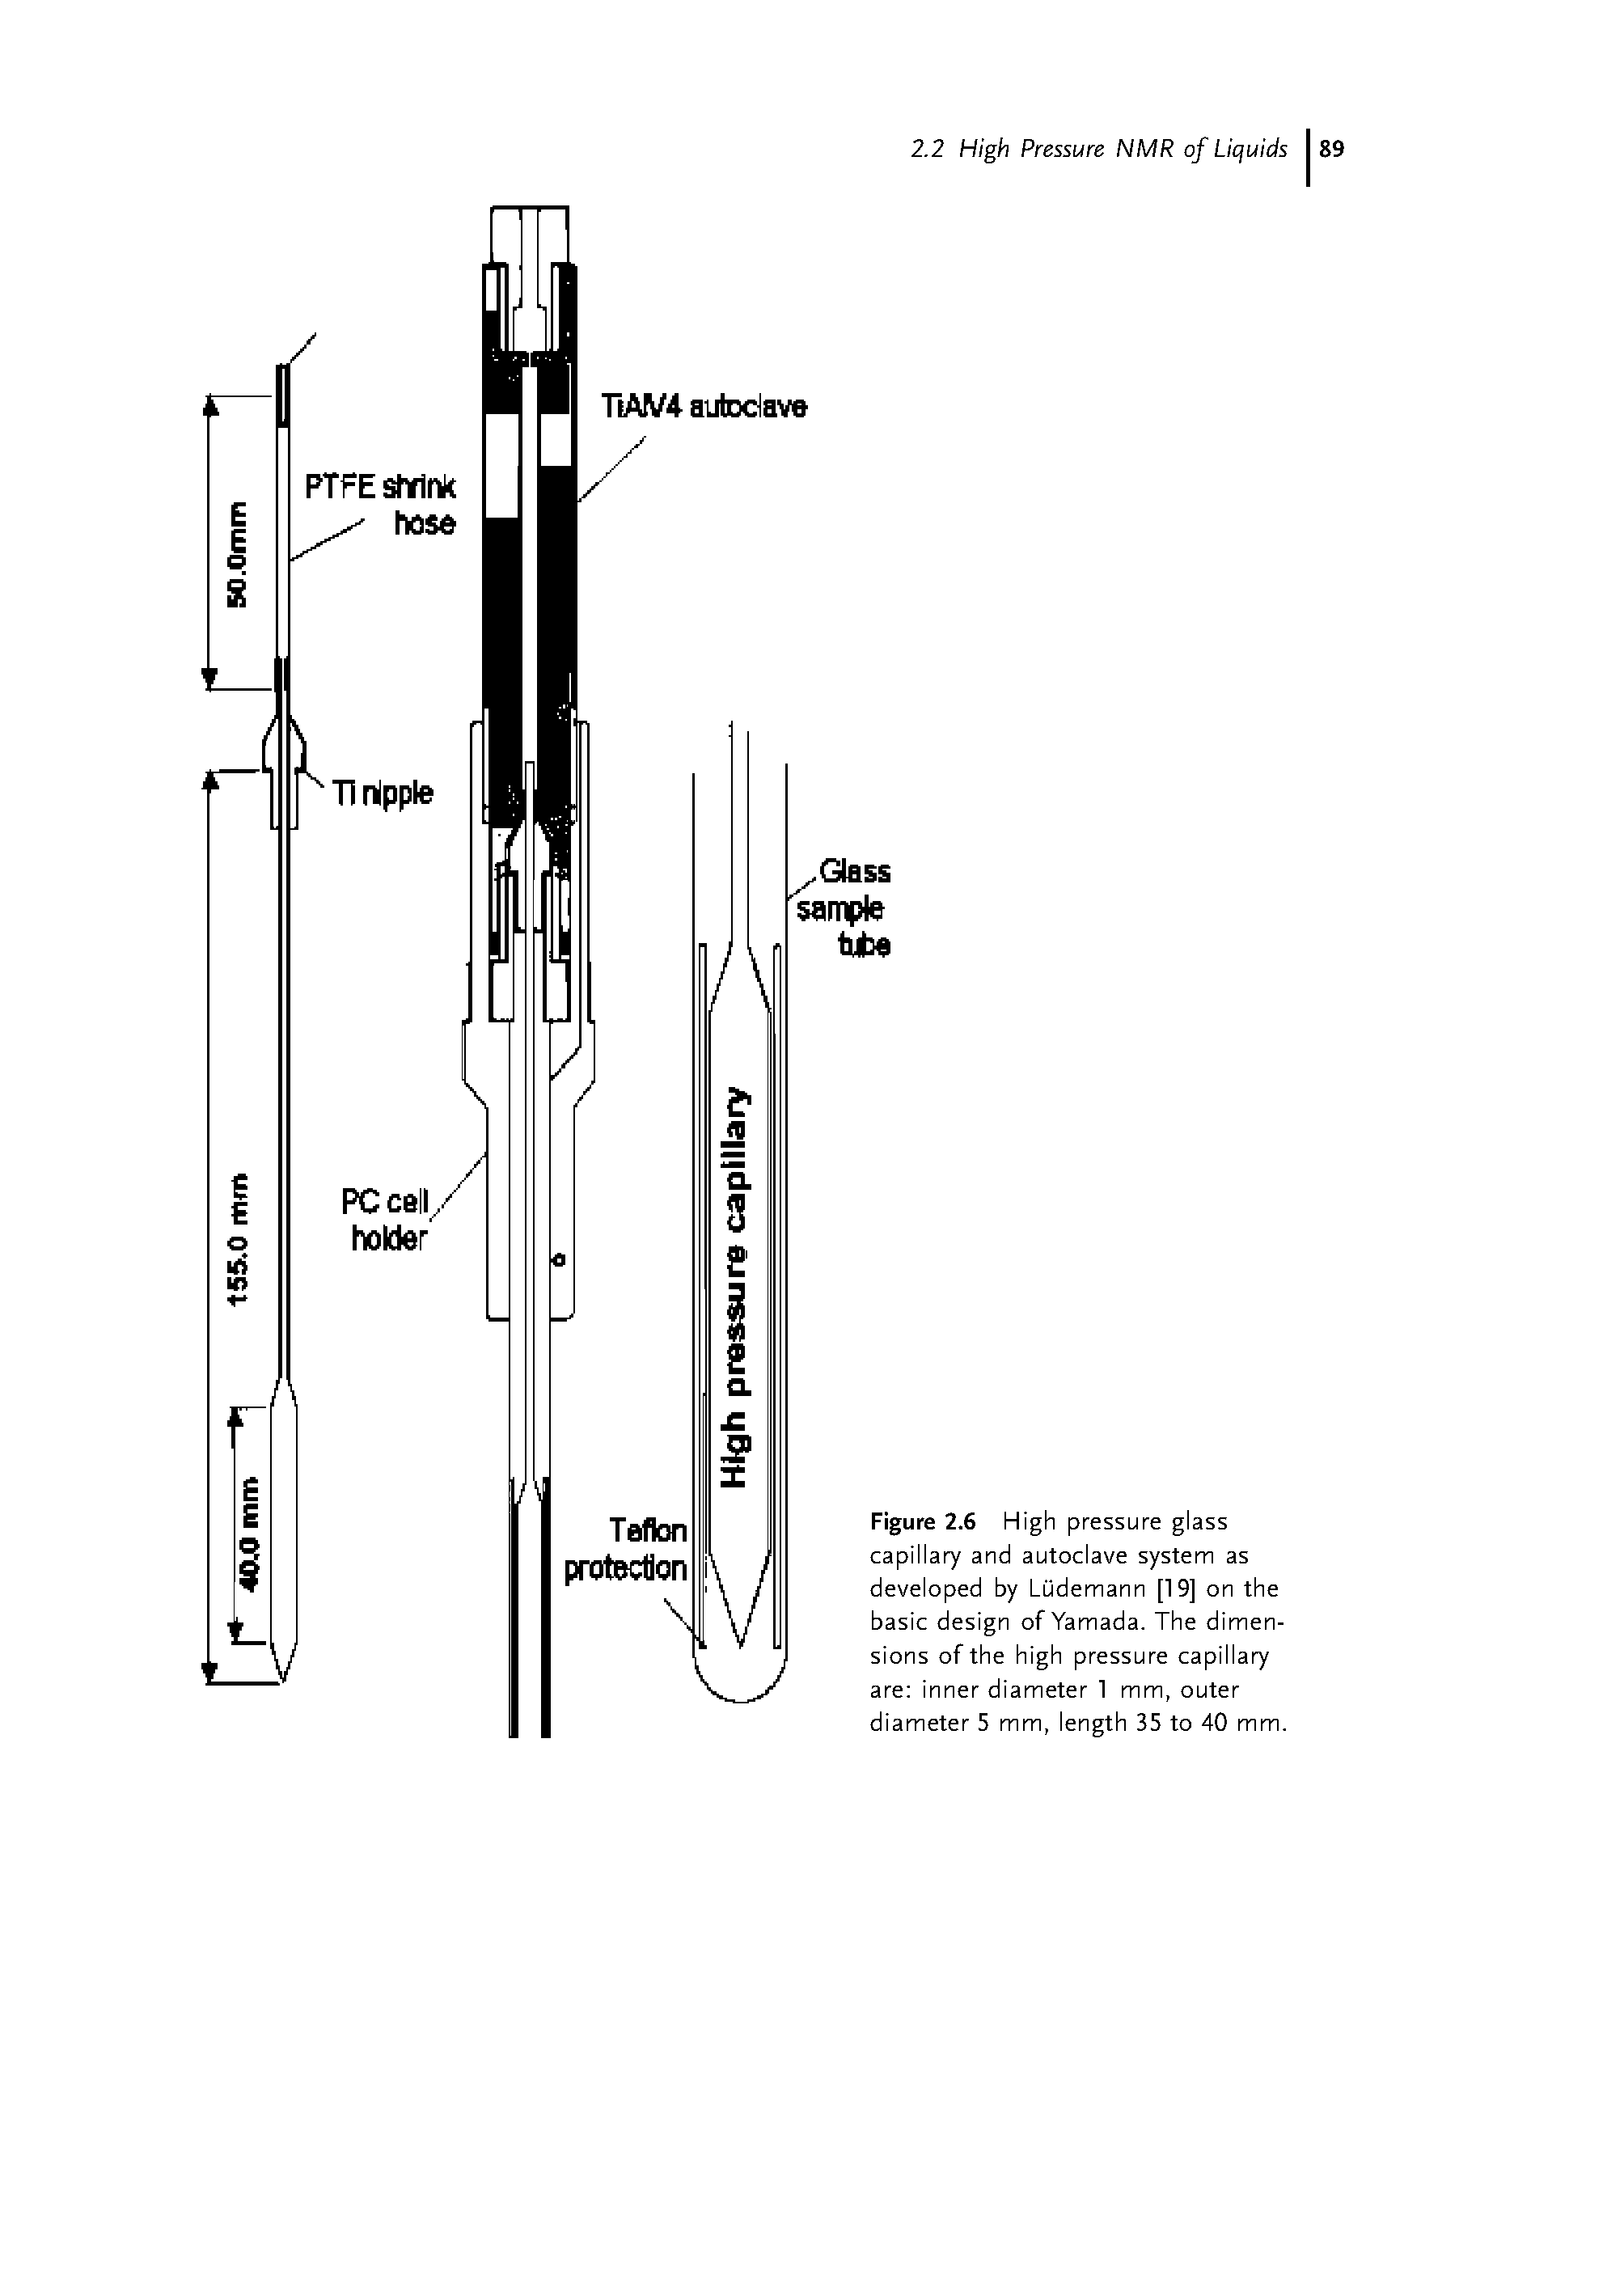 Figure 2.6 High pressure glass capillary and autoclave system as developed by Ludemann [19] on the basic design of Yamada. The dimensions of the high pressure capillary are inner diameter 1 mm, outer diameter 5 mm, length 35 to 40 mm.